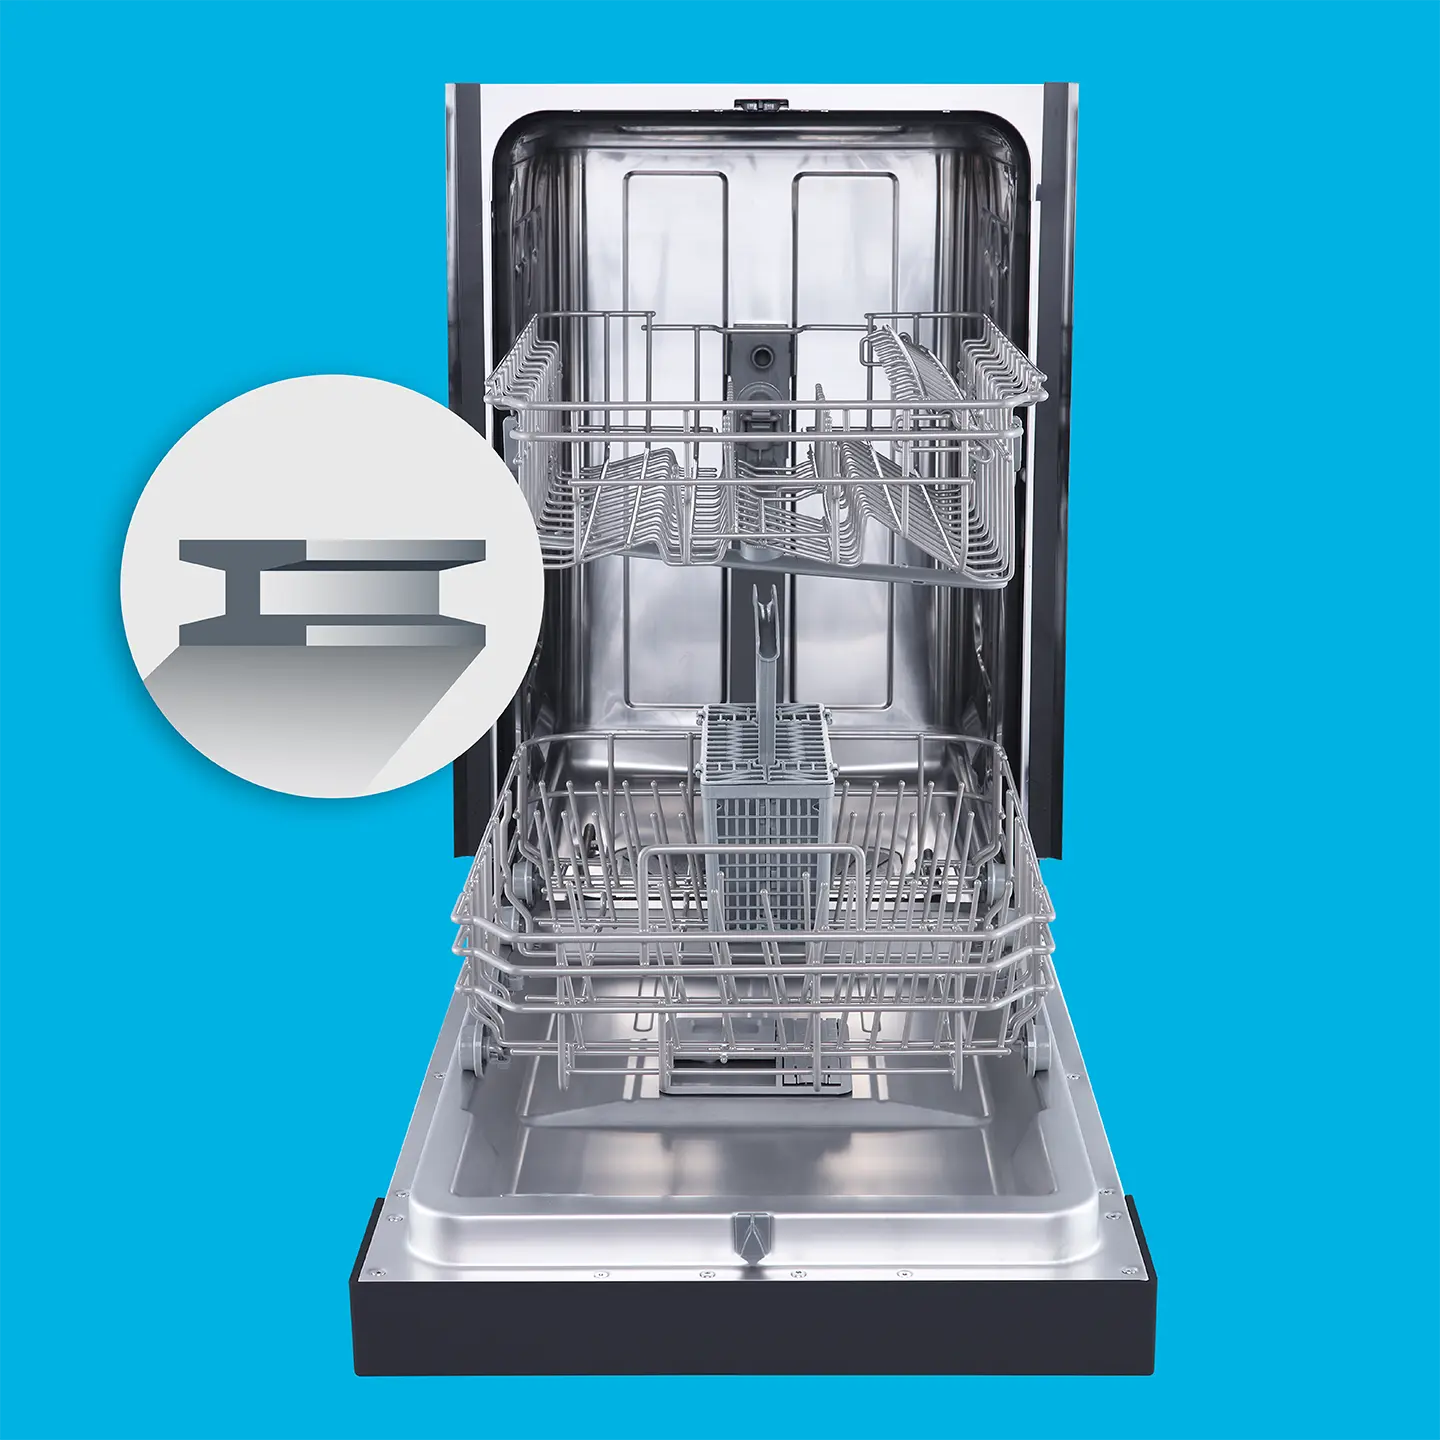 Stainless steam inside of dishwasher